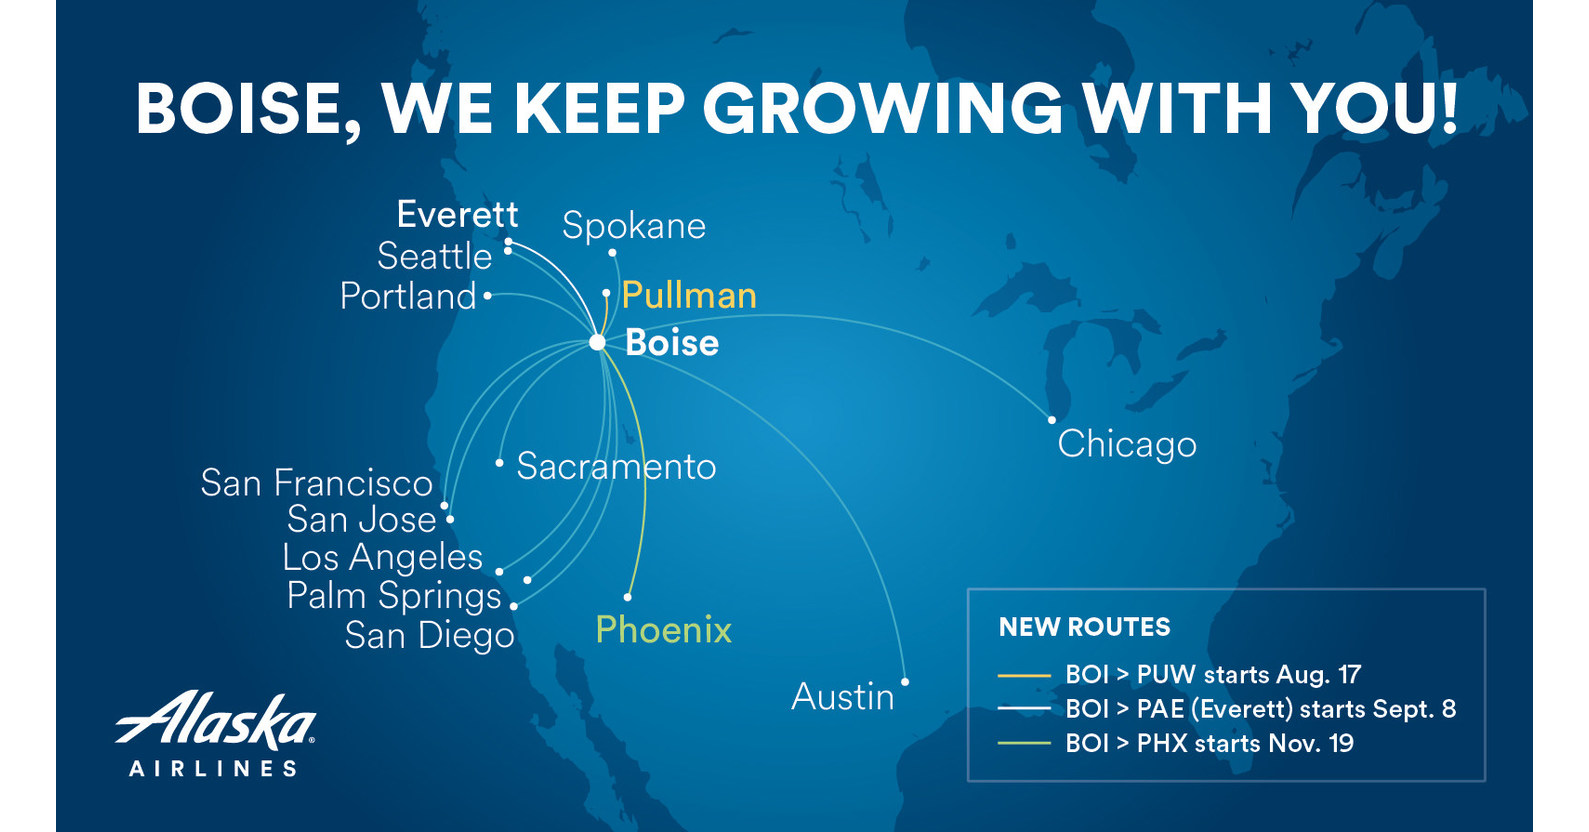 Alaska Airlines grows with Boise, launching new flights and adding more